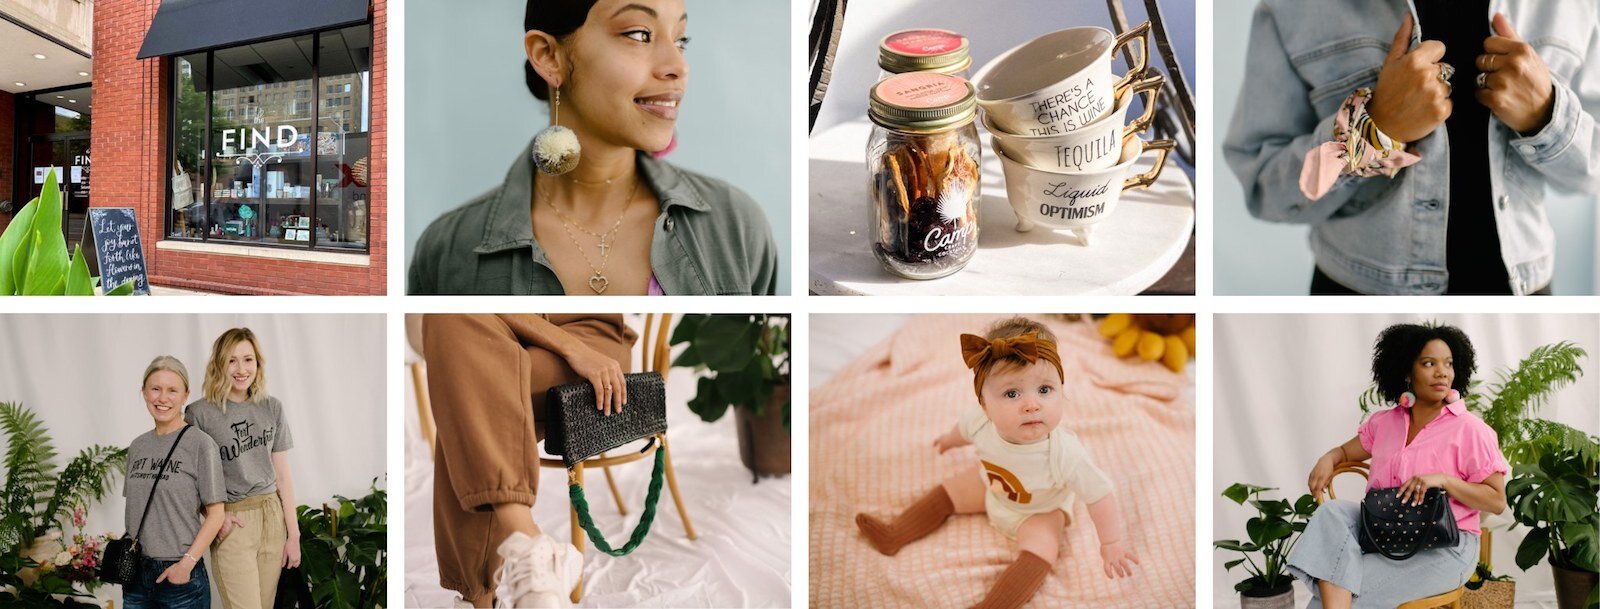 The Find is a “lifestyle shop,” which is equal parts women's clothing and accessories, gifts and décor, and baby products and unique toys. 